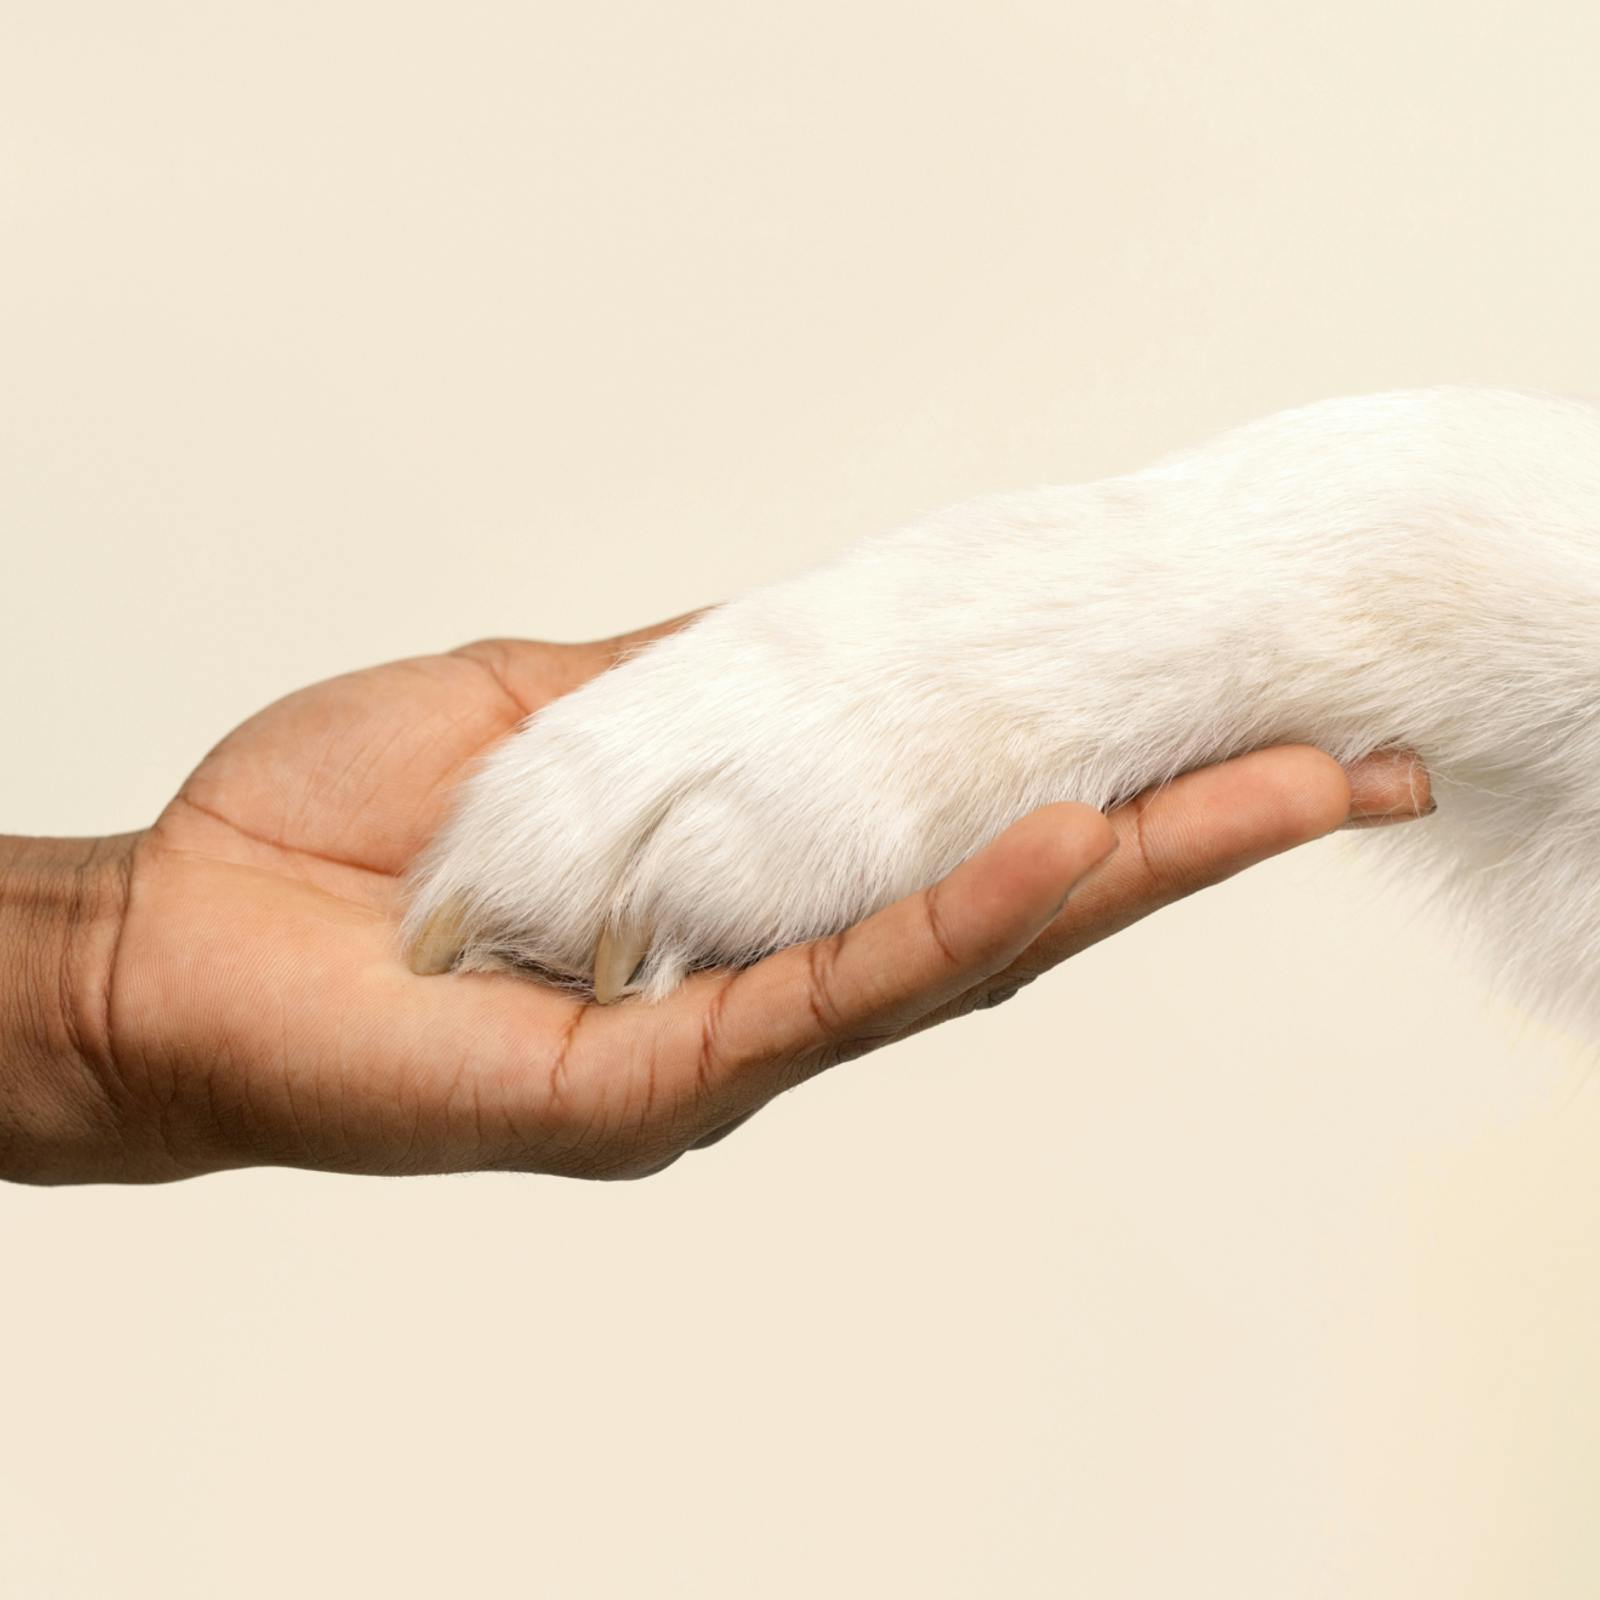 Vet's hand gently holding dog's paw